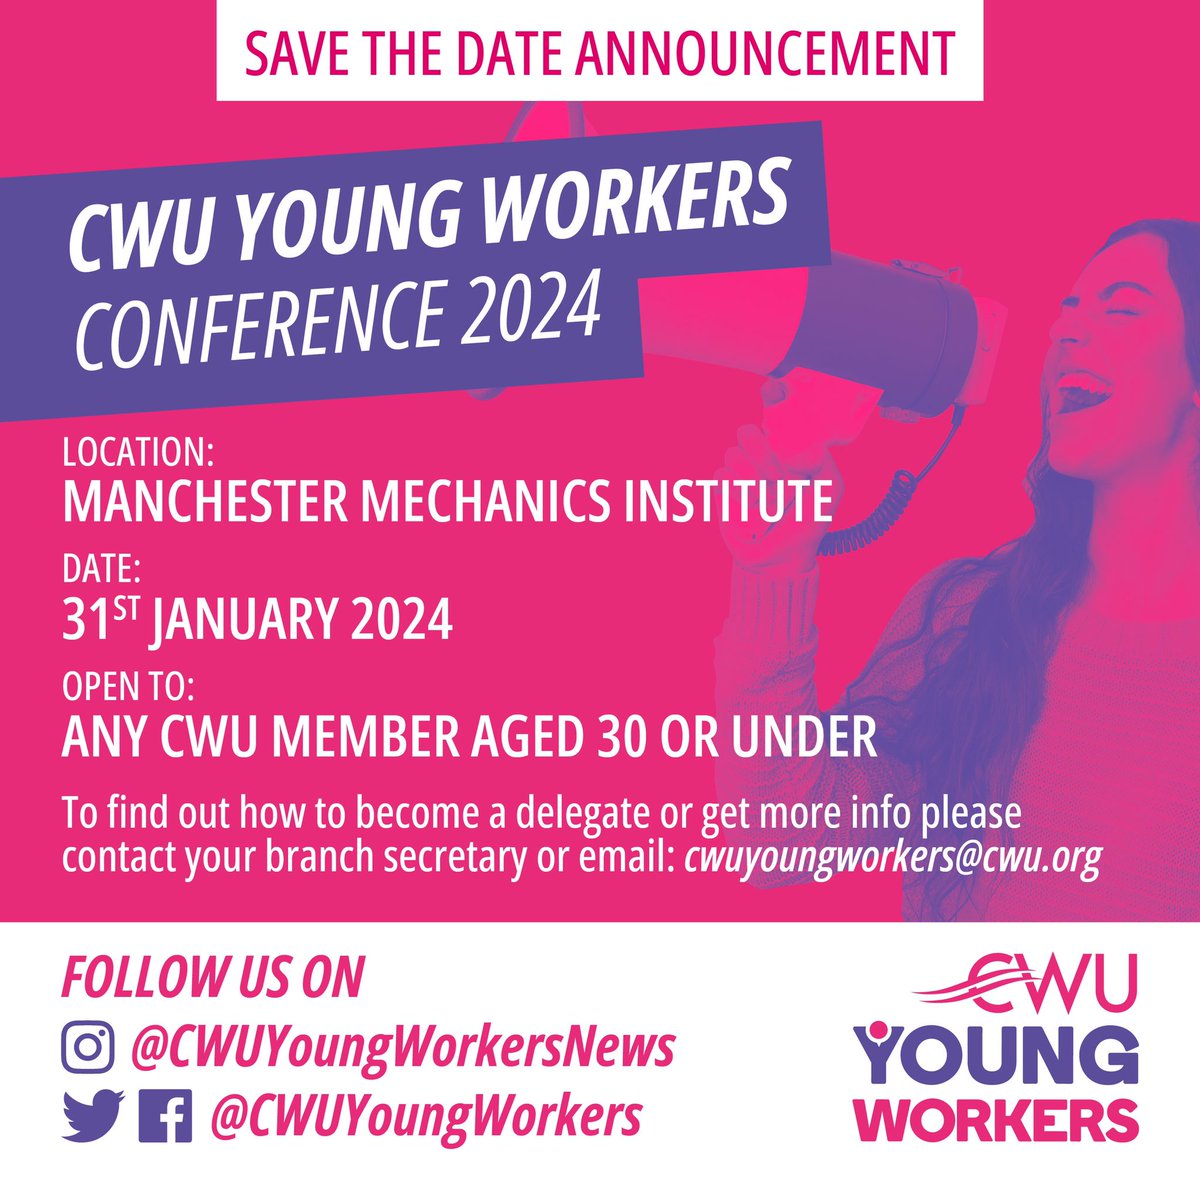 ⭐️ CALLING ALL CWU& UTAW YOUNG WORKERS! Our annual Young Workers conference will be taking place in Manchester on the 31st January 2024. Please contact your branch to get registered as a delegate or reach out to us on cwuyoungworkers@cwu.org for further information. @CWUnews